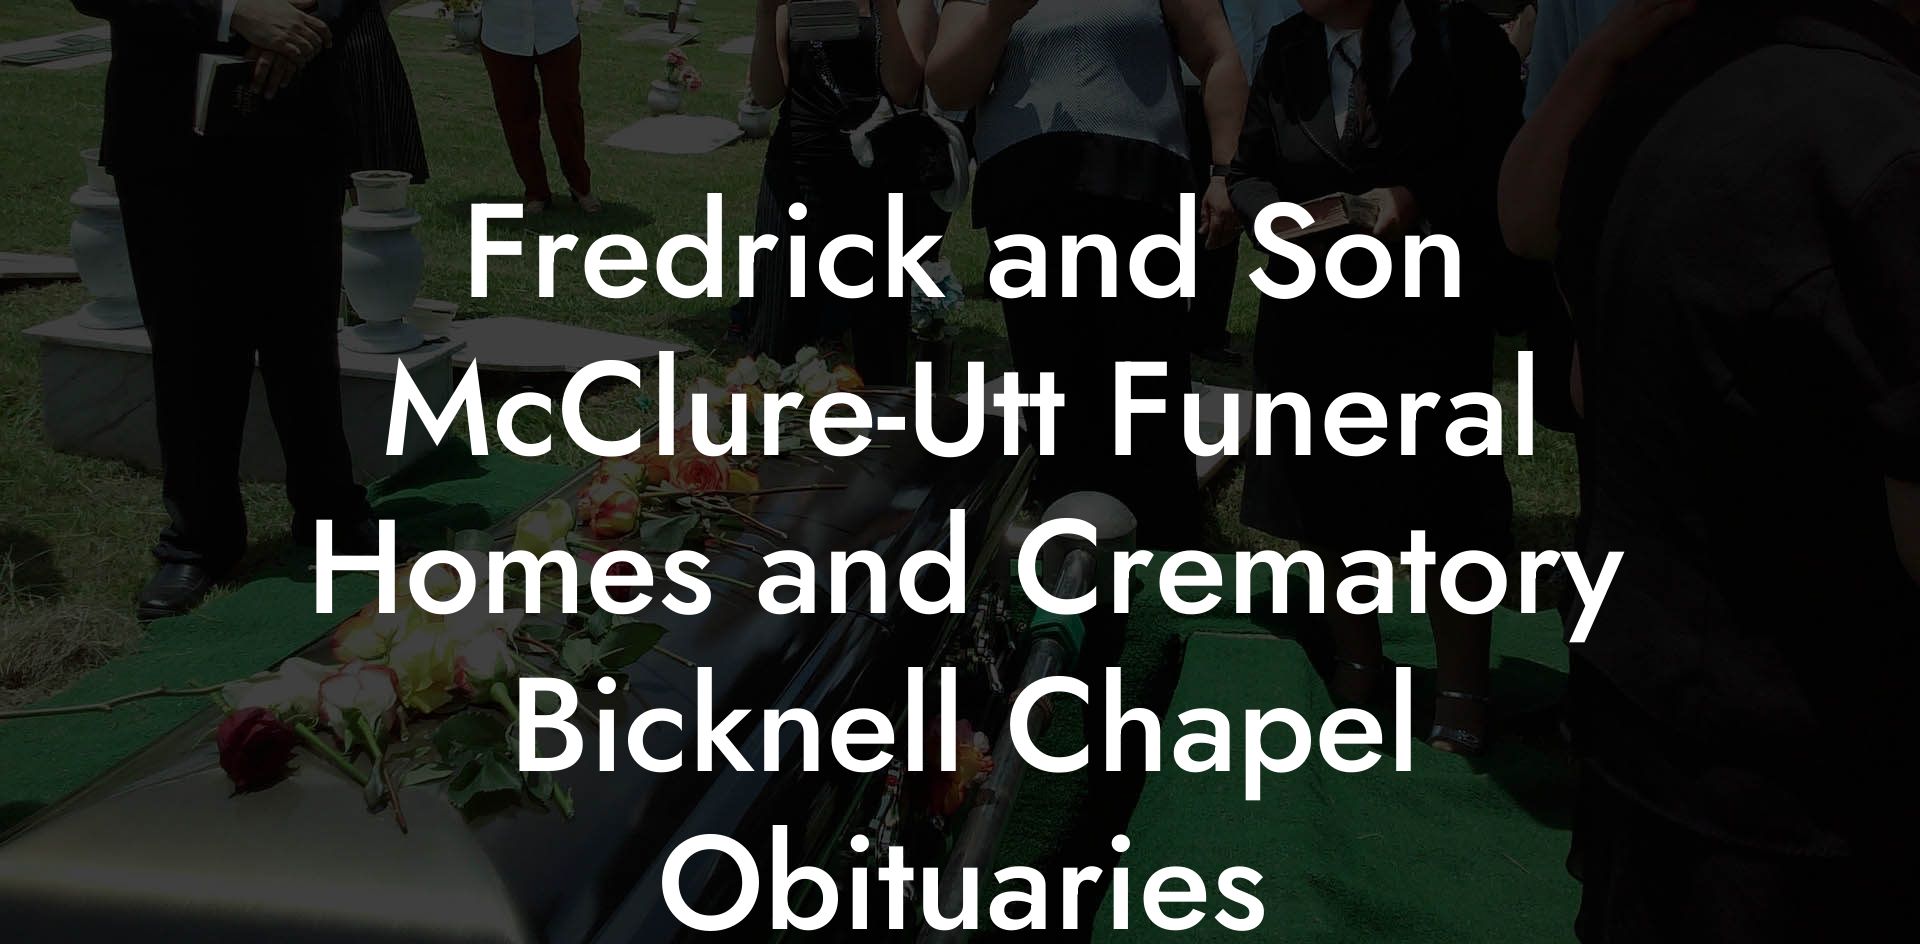 Fredrick and Son McClure-Utt Funeral Homes and Crematory Bicknell Chapel Obituaries